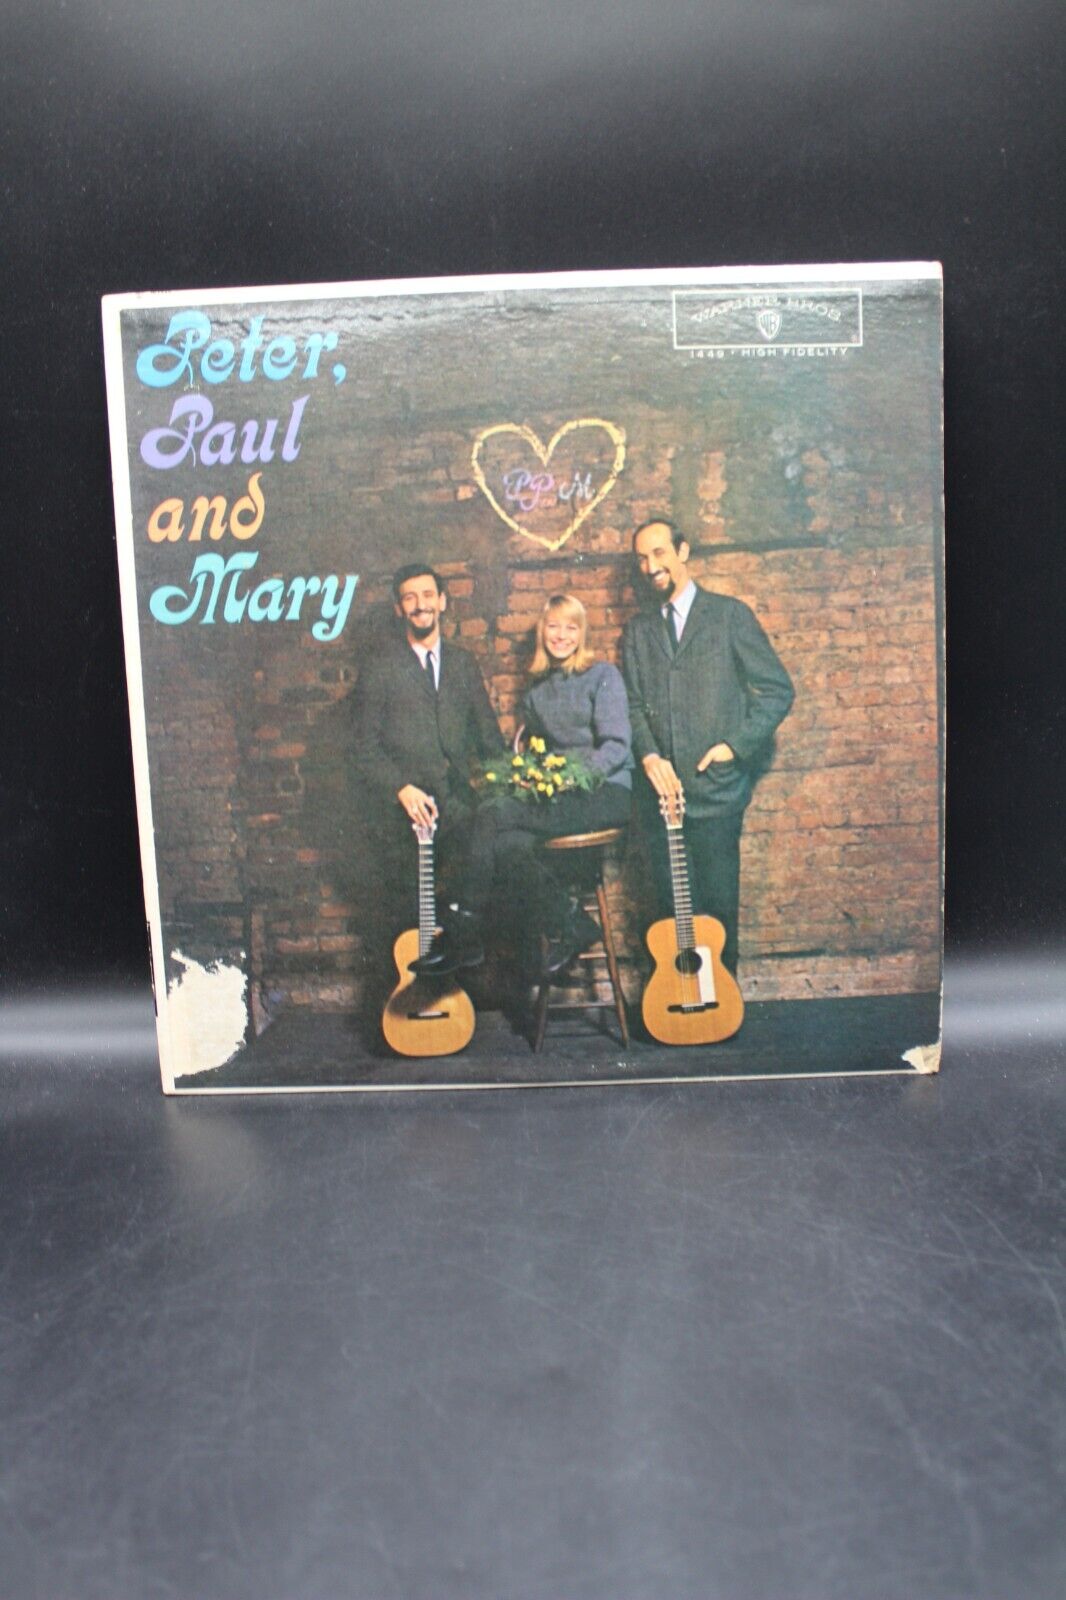 Peter, Paul and Mary - Peter, Paul and Mary [1962 Mono] [Used Vinyl Record]